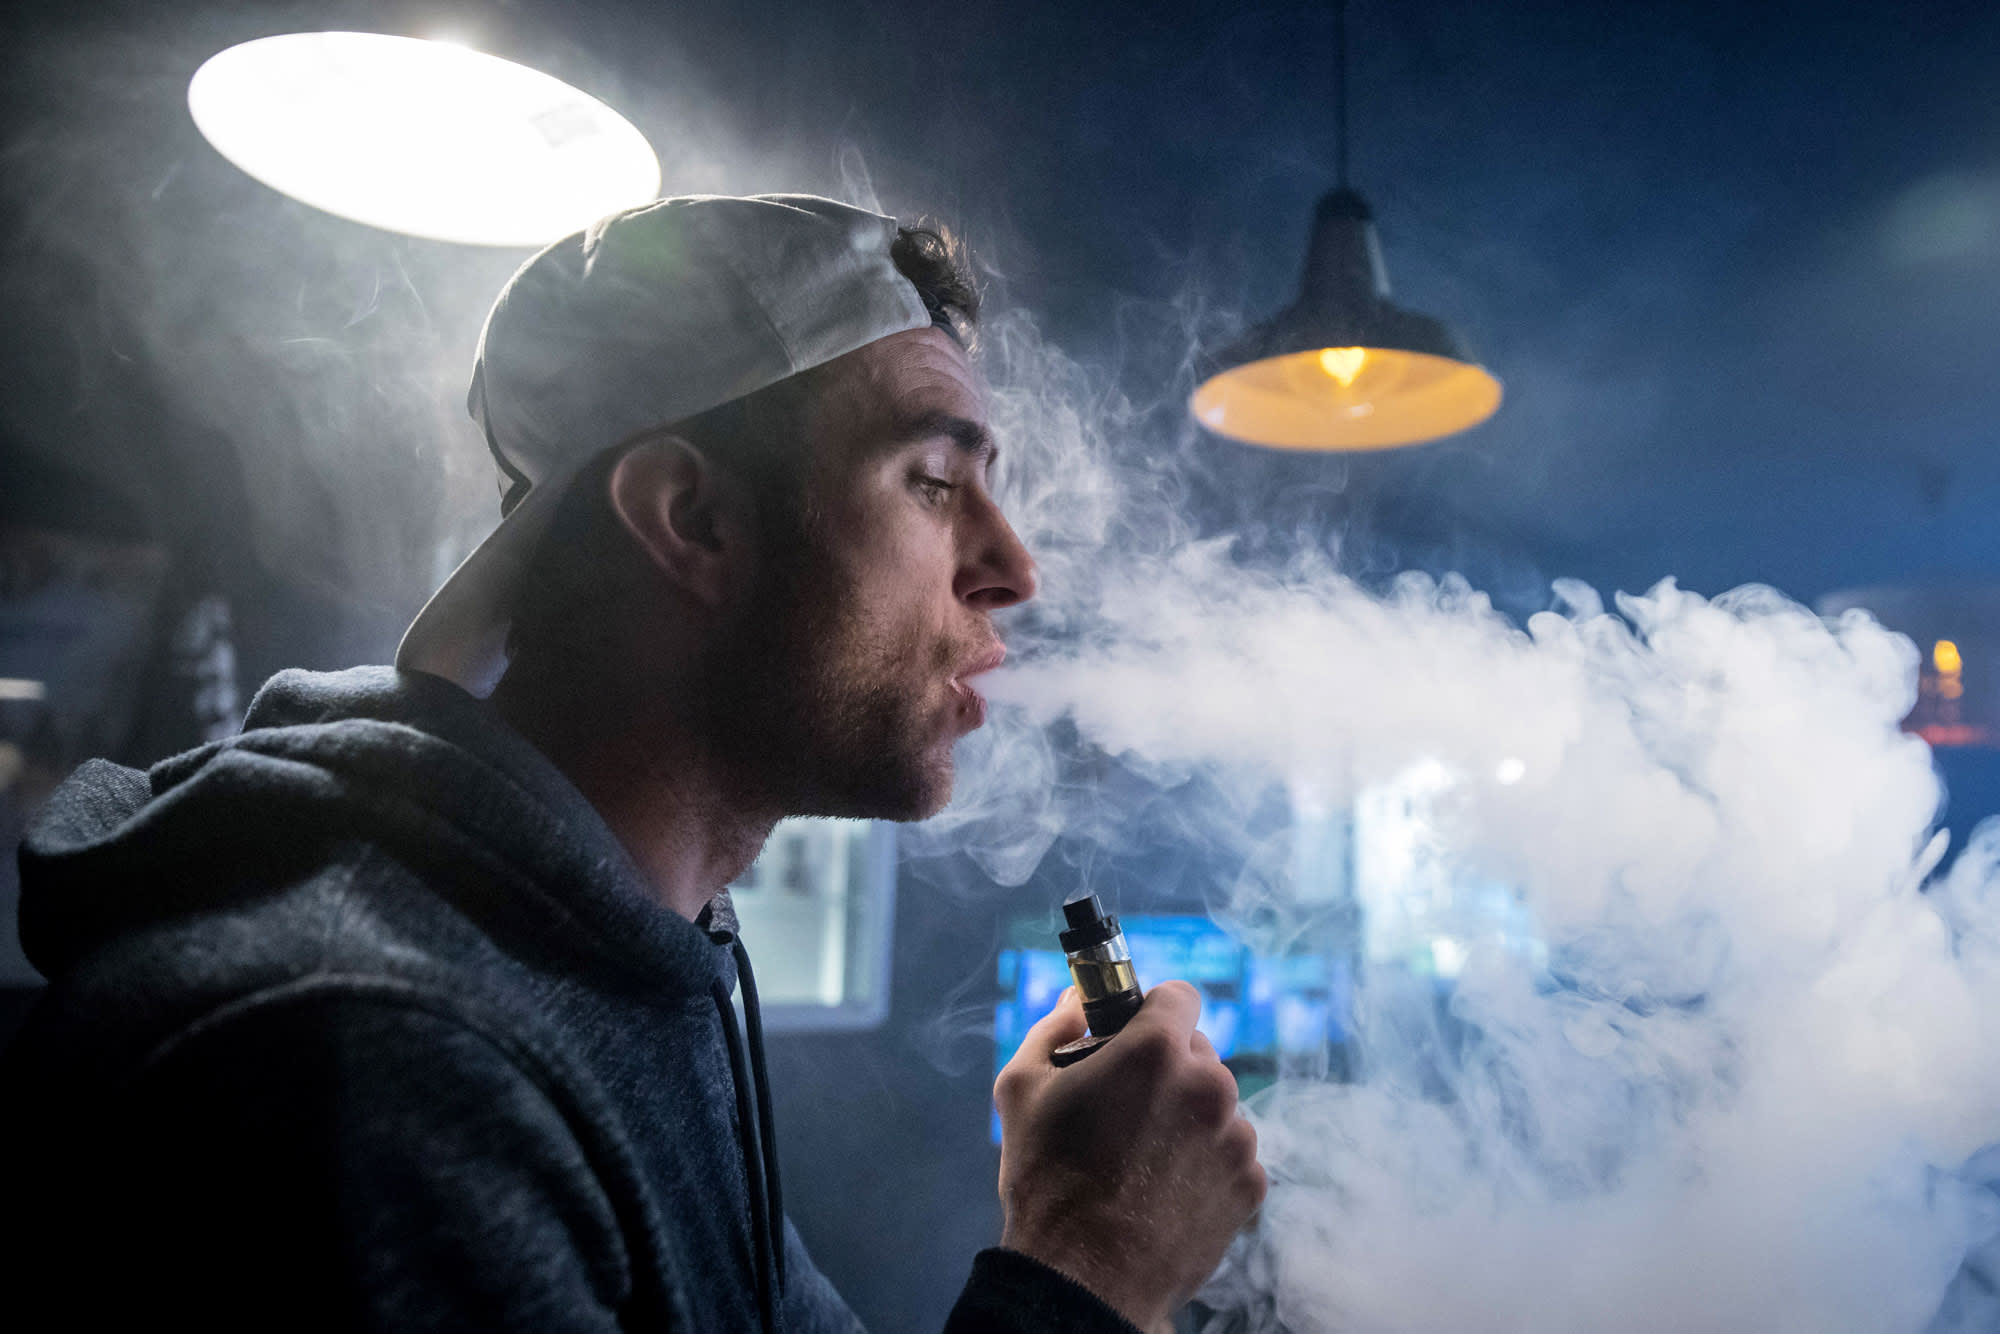 Vaping? You could be inhaling lead and arsenic, a new study says